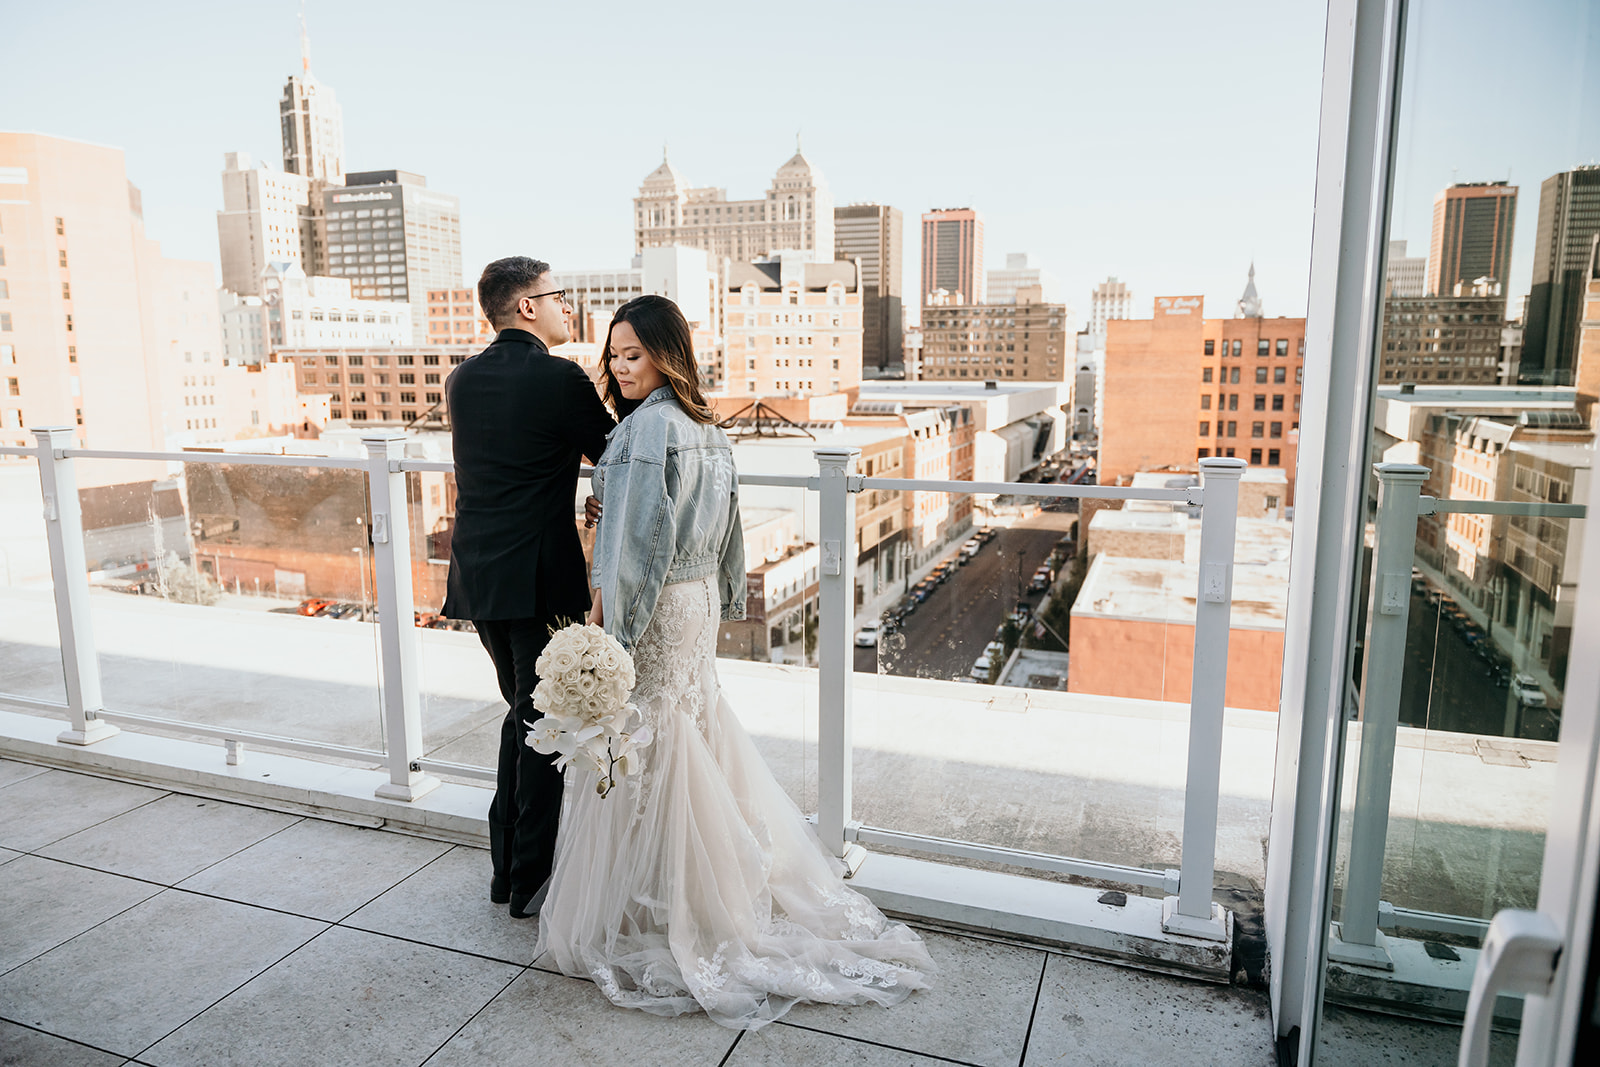 Classic wedding at the Curtiss Hotel in Buffalo, NY